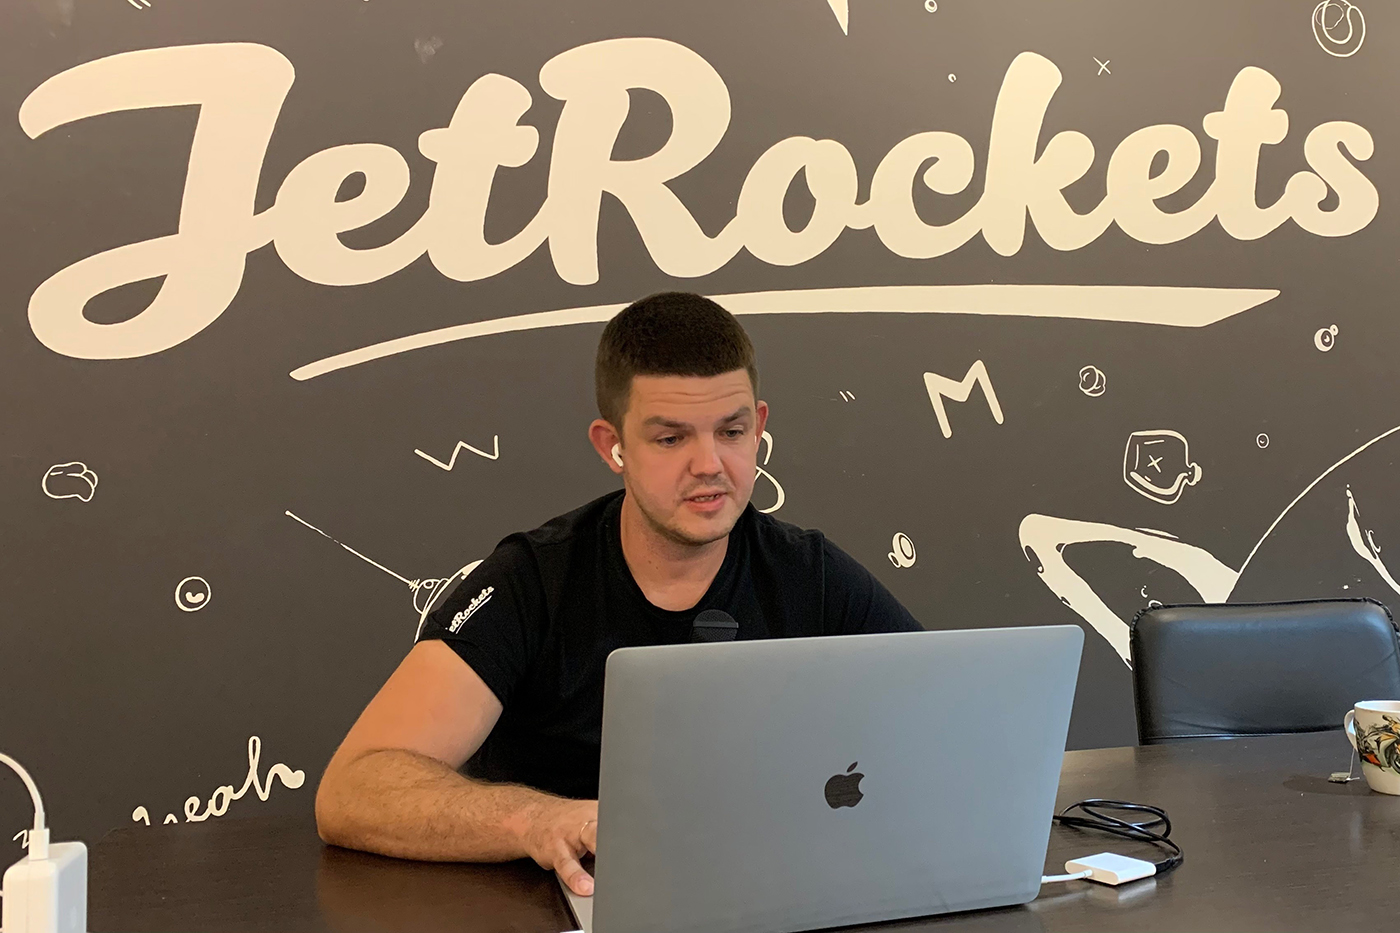 person working on laptop in front of jetrockets logo